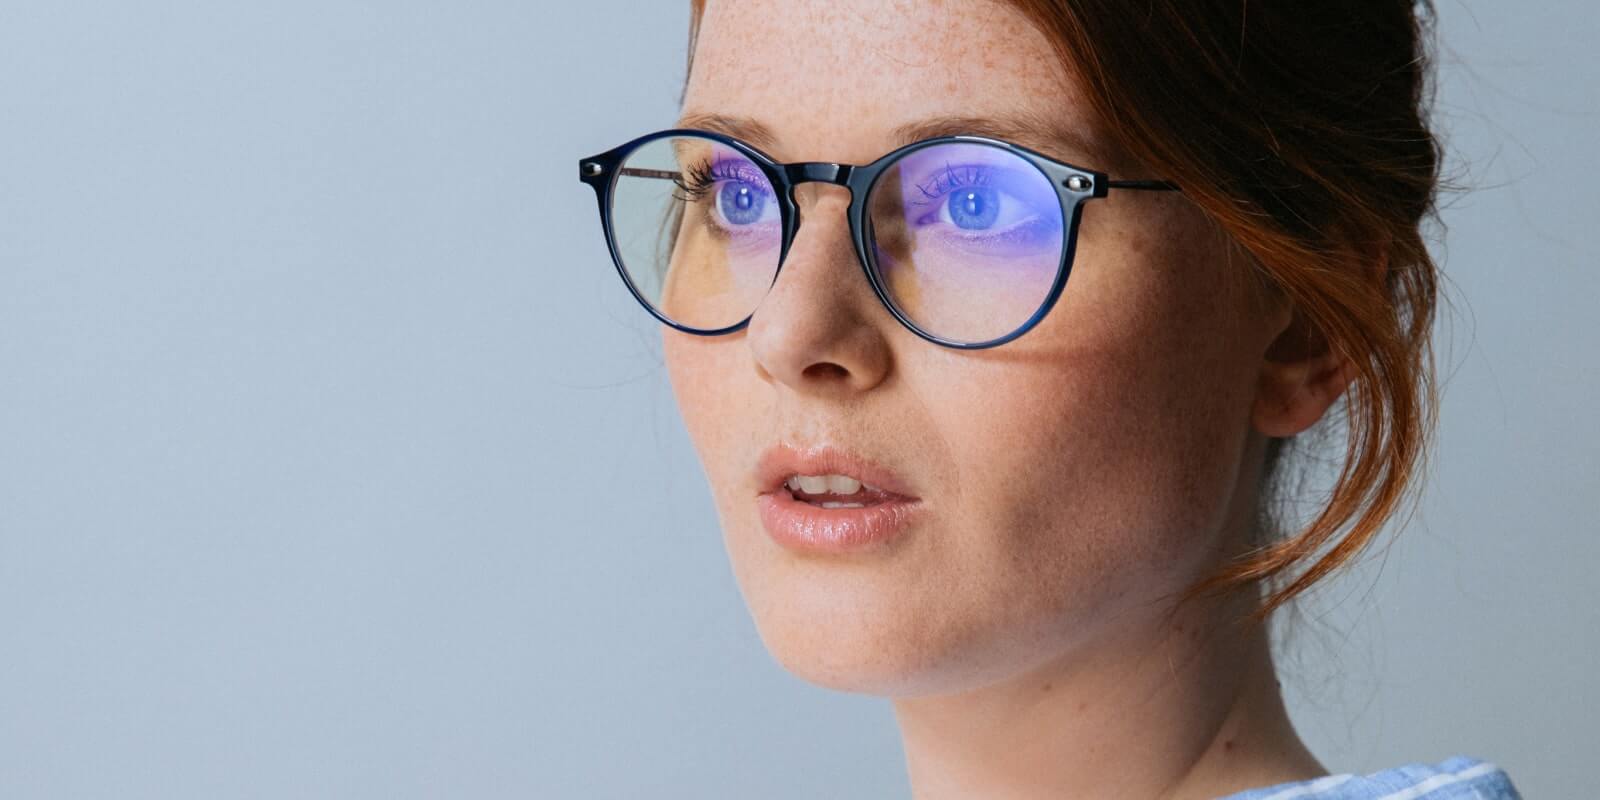 Blue anti-light glasses of round shape worn by a red-haired woman